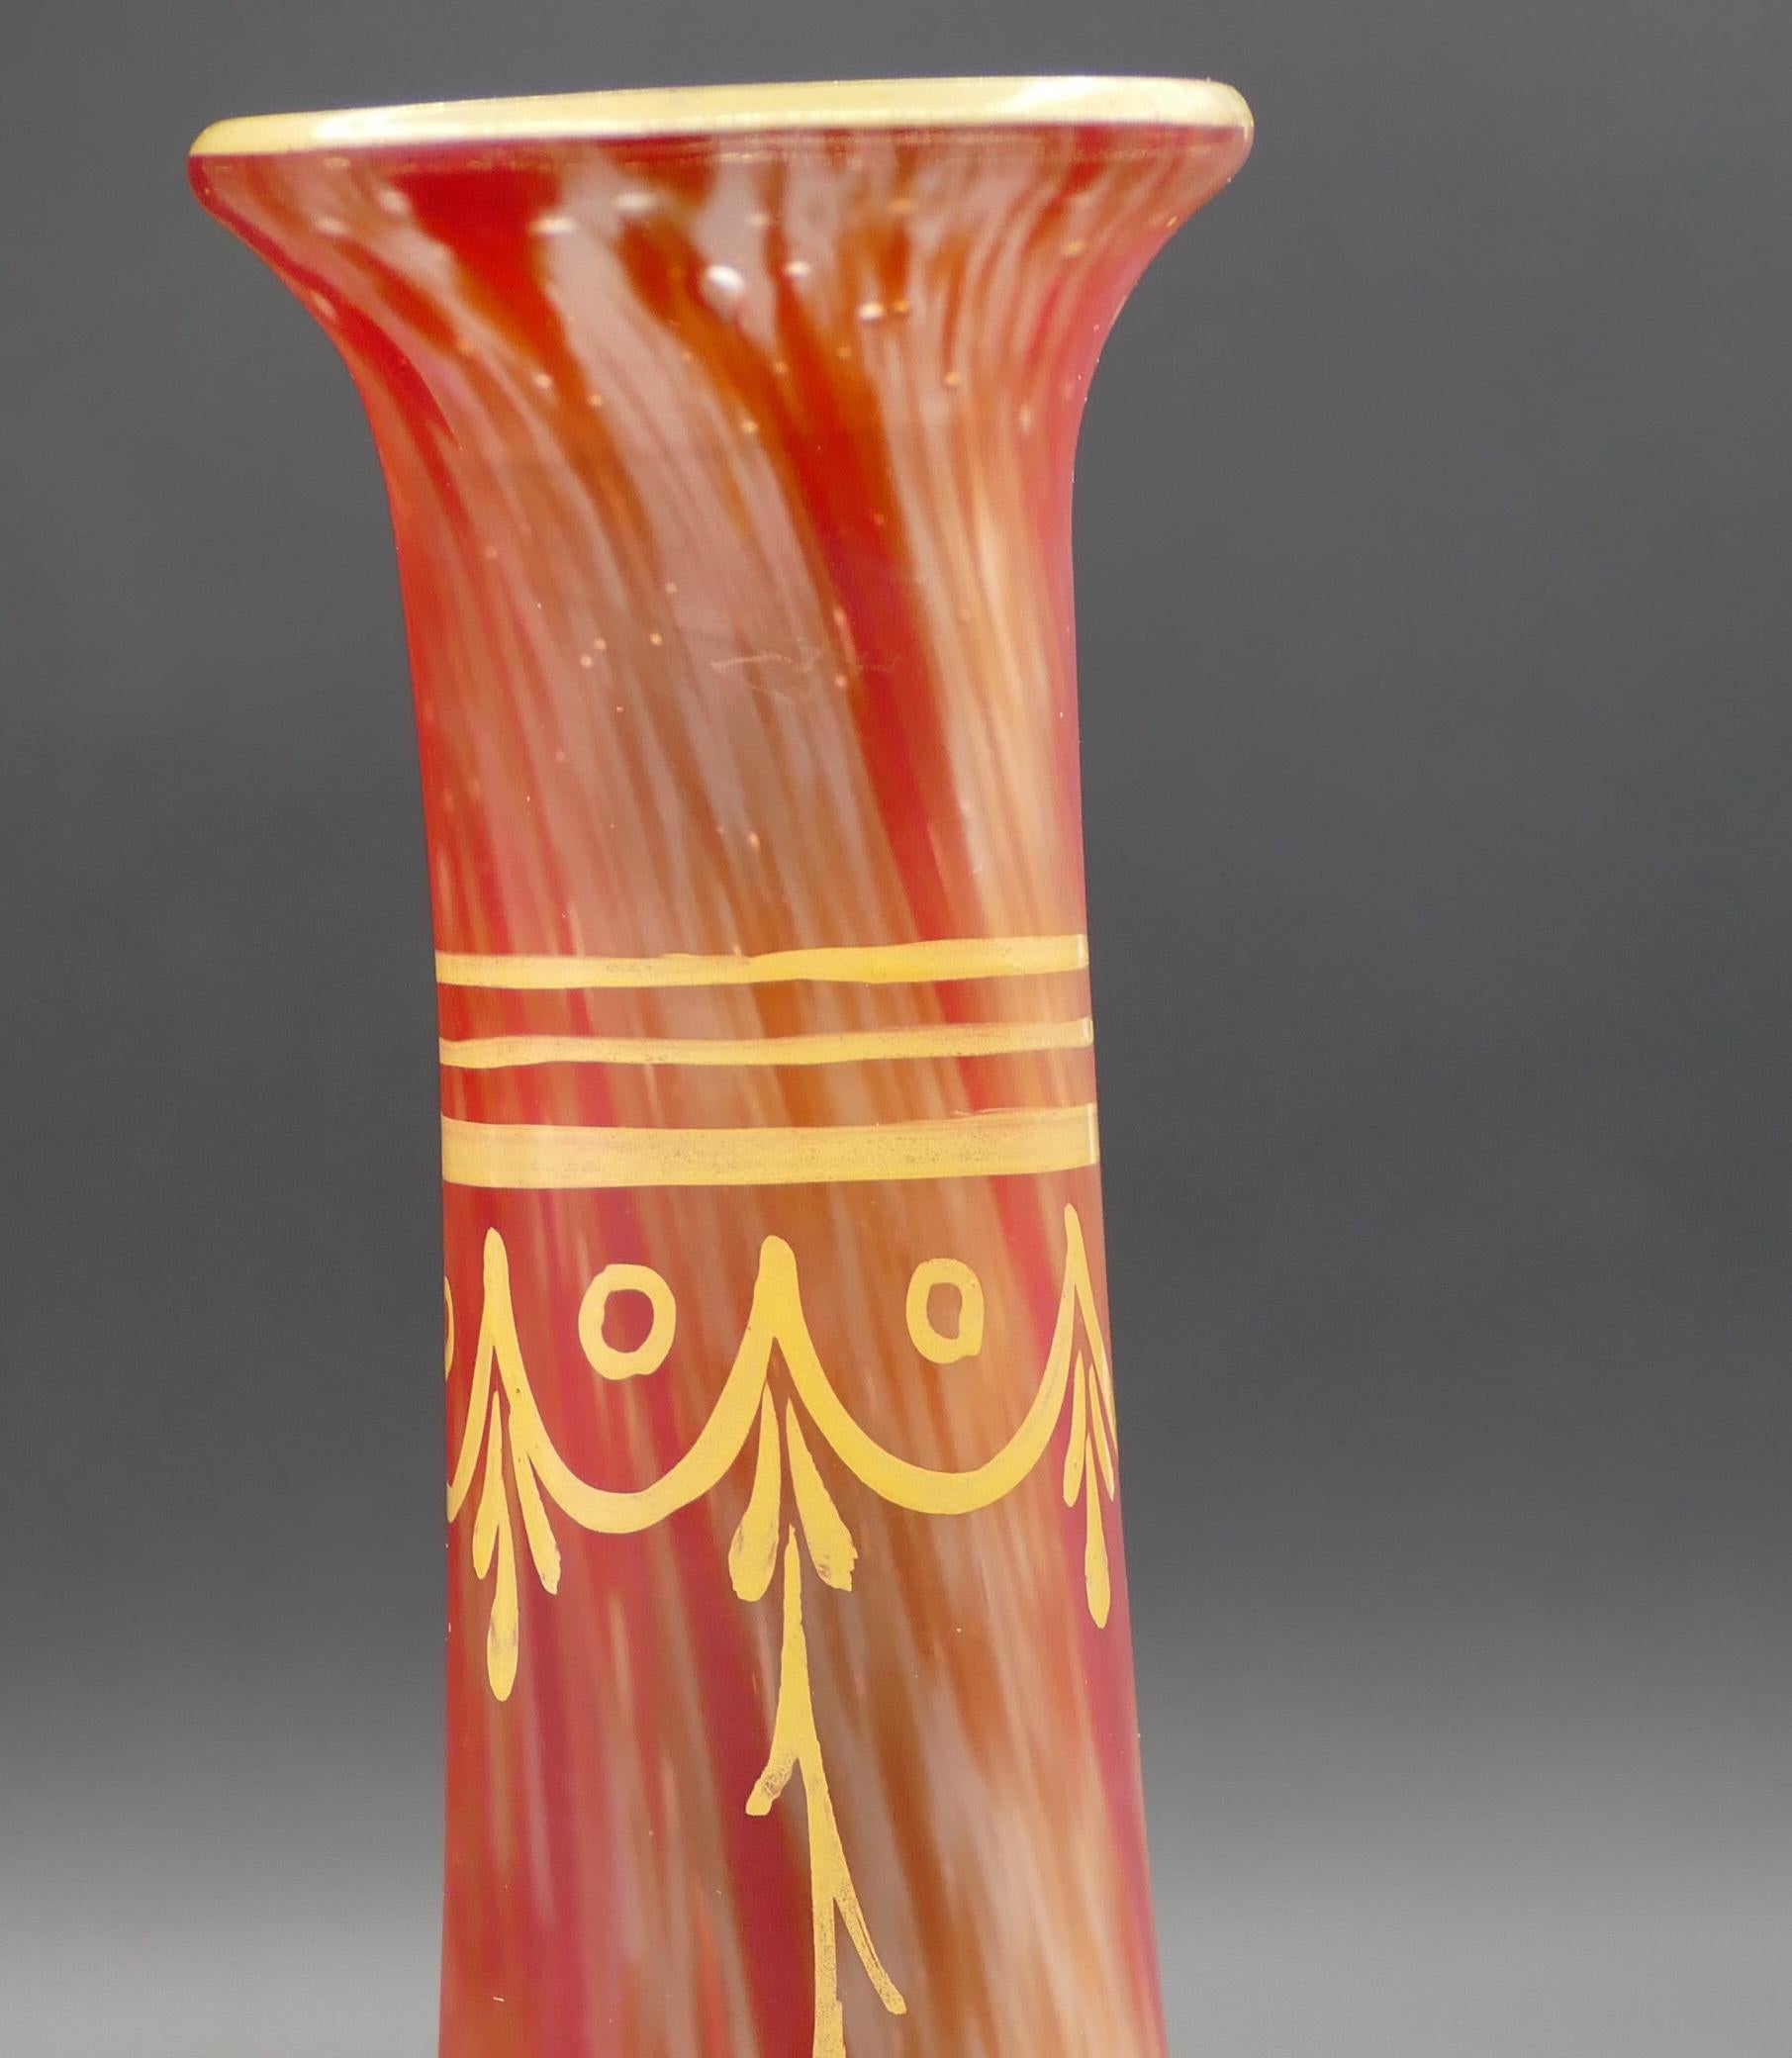 Art Deco Art Nouveau Red Marbled Vase by Legras & Cie, France, Early 20th Century For Sale